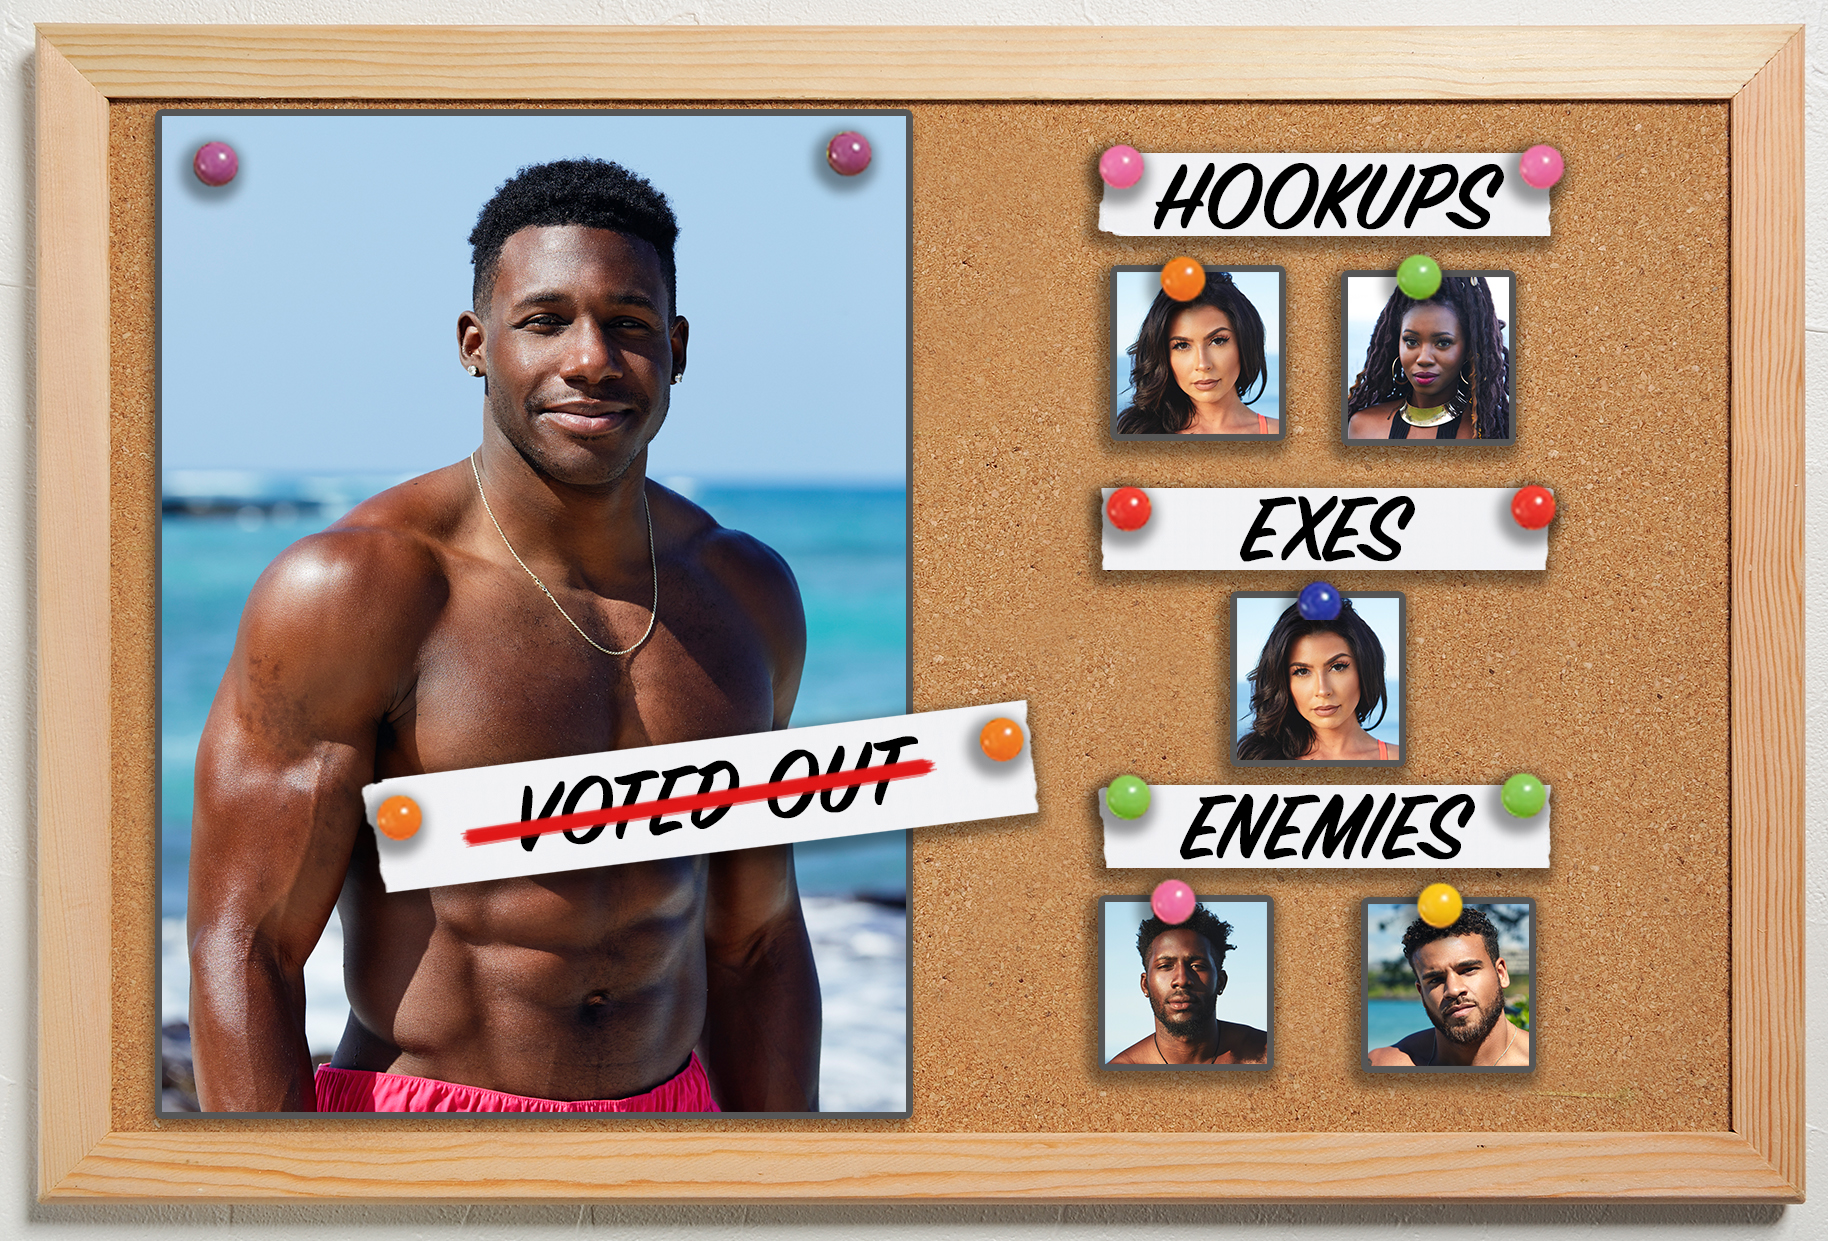 Ex on the Beach Relationships: Who's Hooked up With Who?